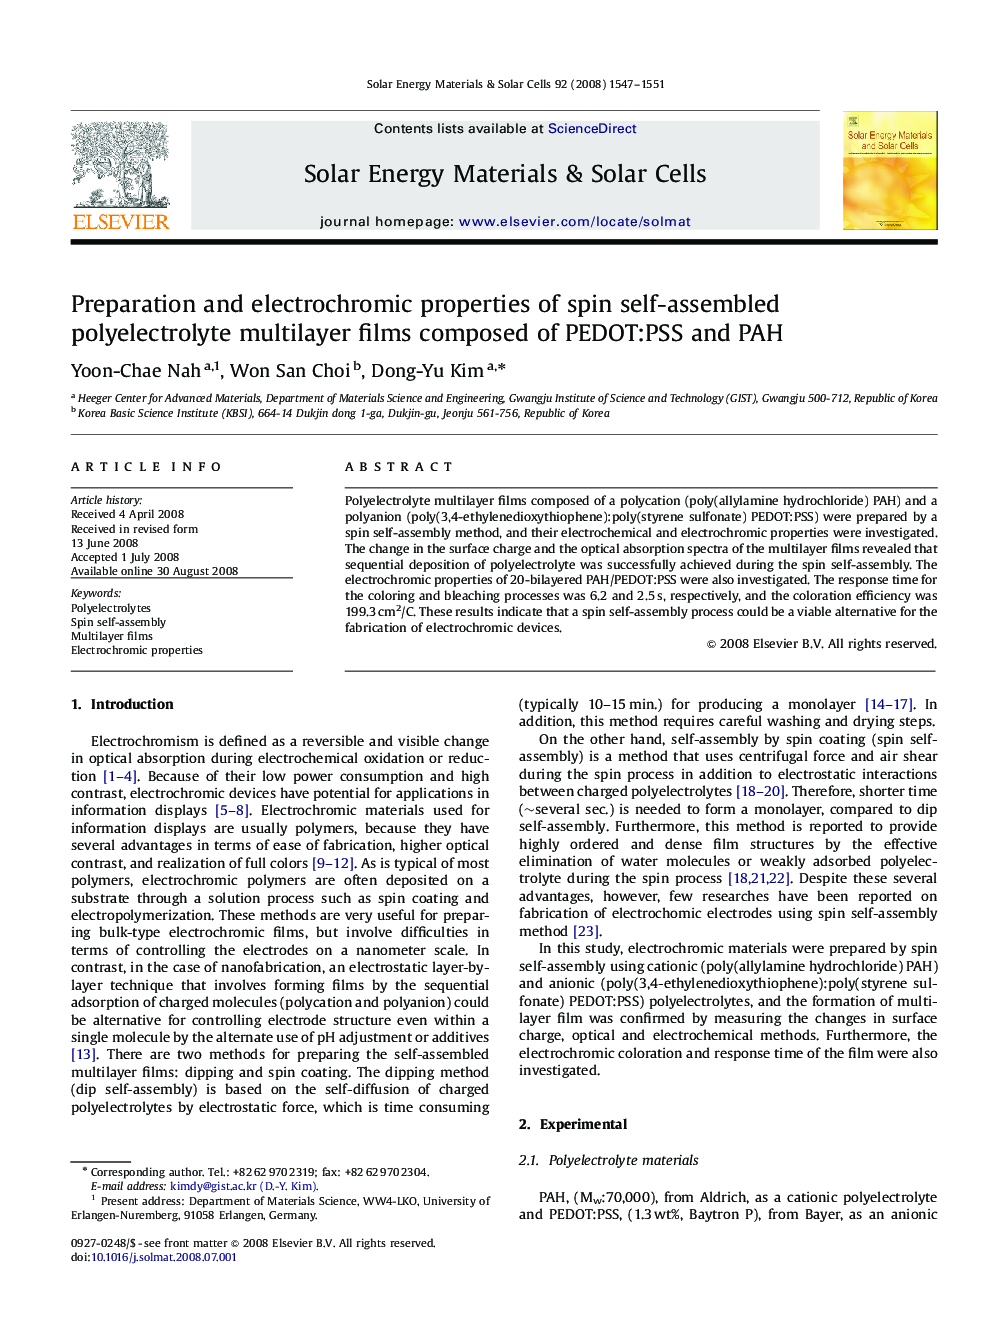 Preparation and electrochromic properties of spin self-assembled polyelectrolyte multilayer films composed of PEDOT:PSS and PAH